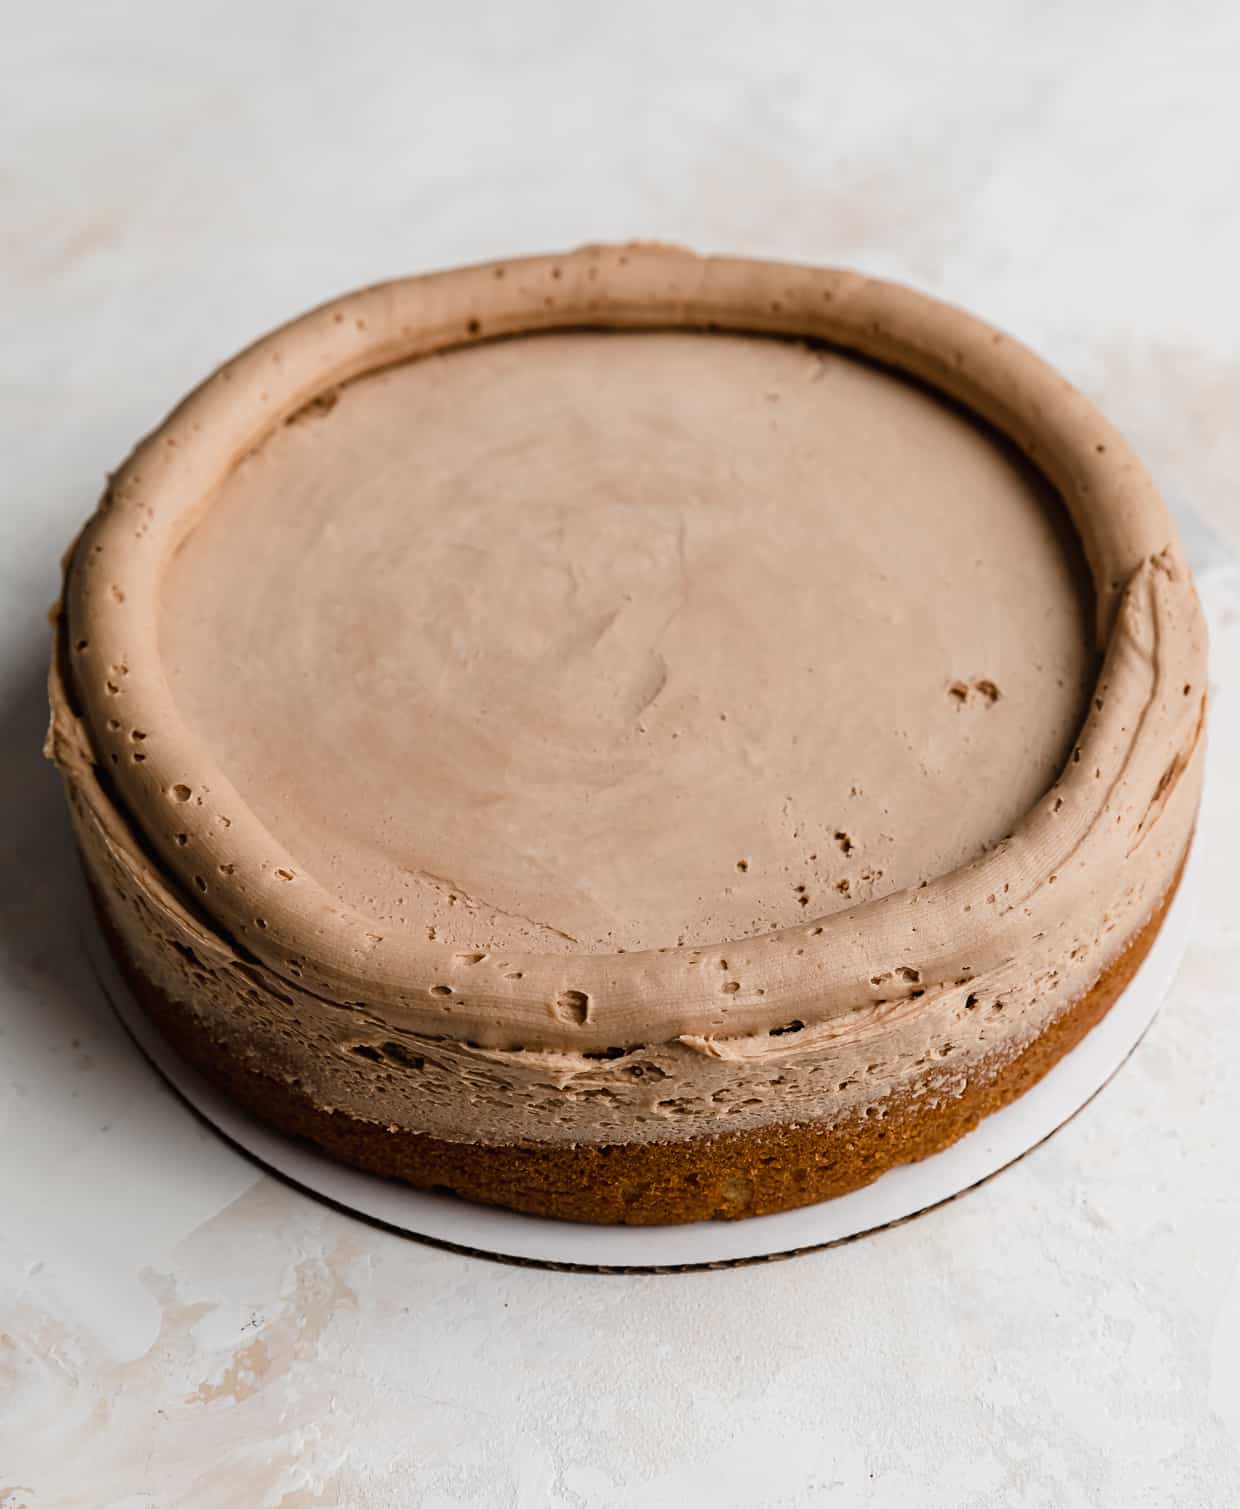 A butterscotch chocolate frosting rim piped around the edges of a round cake layer.